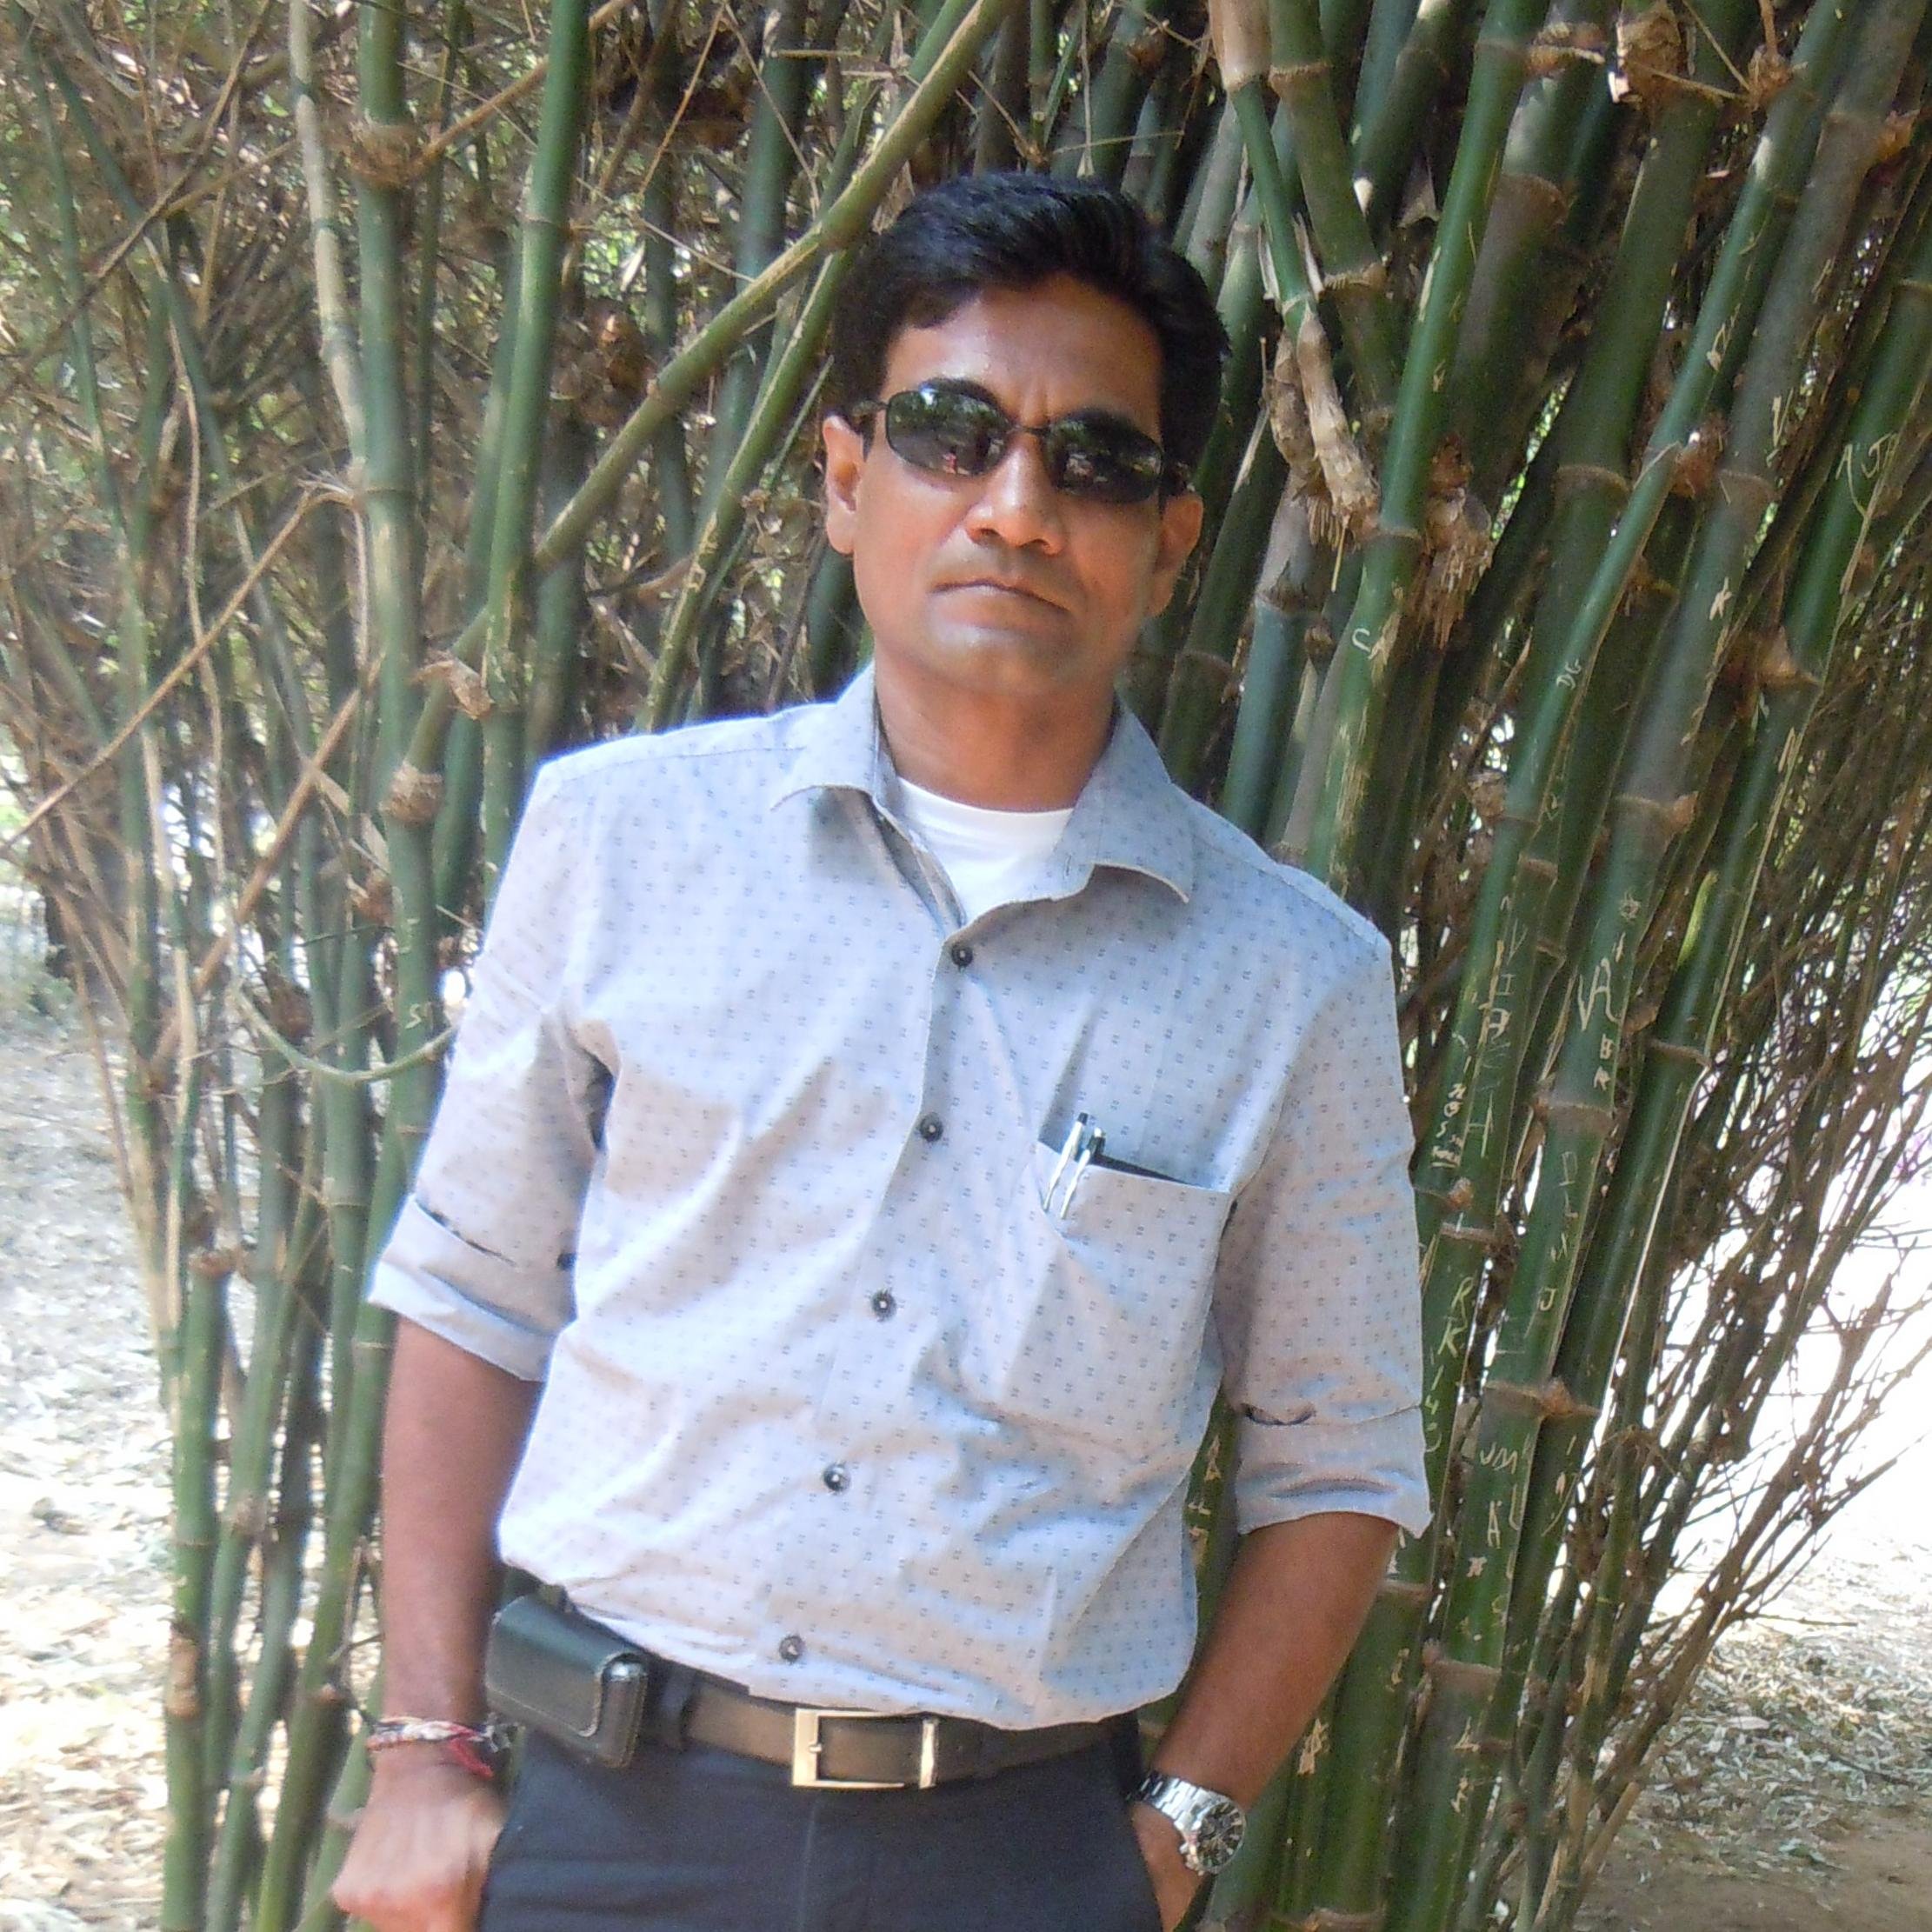 SEMI. GOVT. SERVANT, ENGINEER IN MUNICIPAL CORPORATION,LIKES TRAVEL,ADVENTURE,FASHION AND SCIENCE-TECHNOLOGY,LOVES NATURE